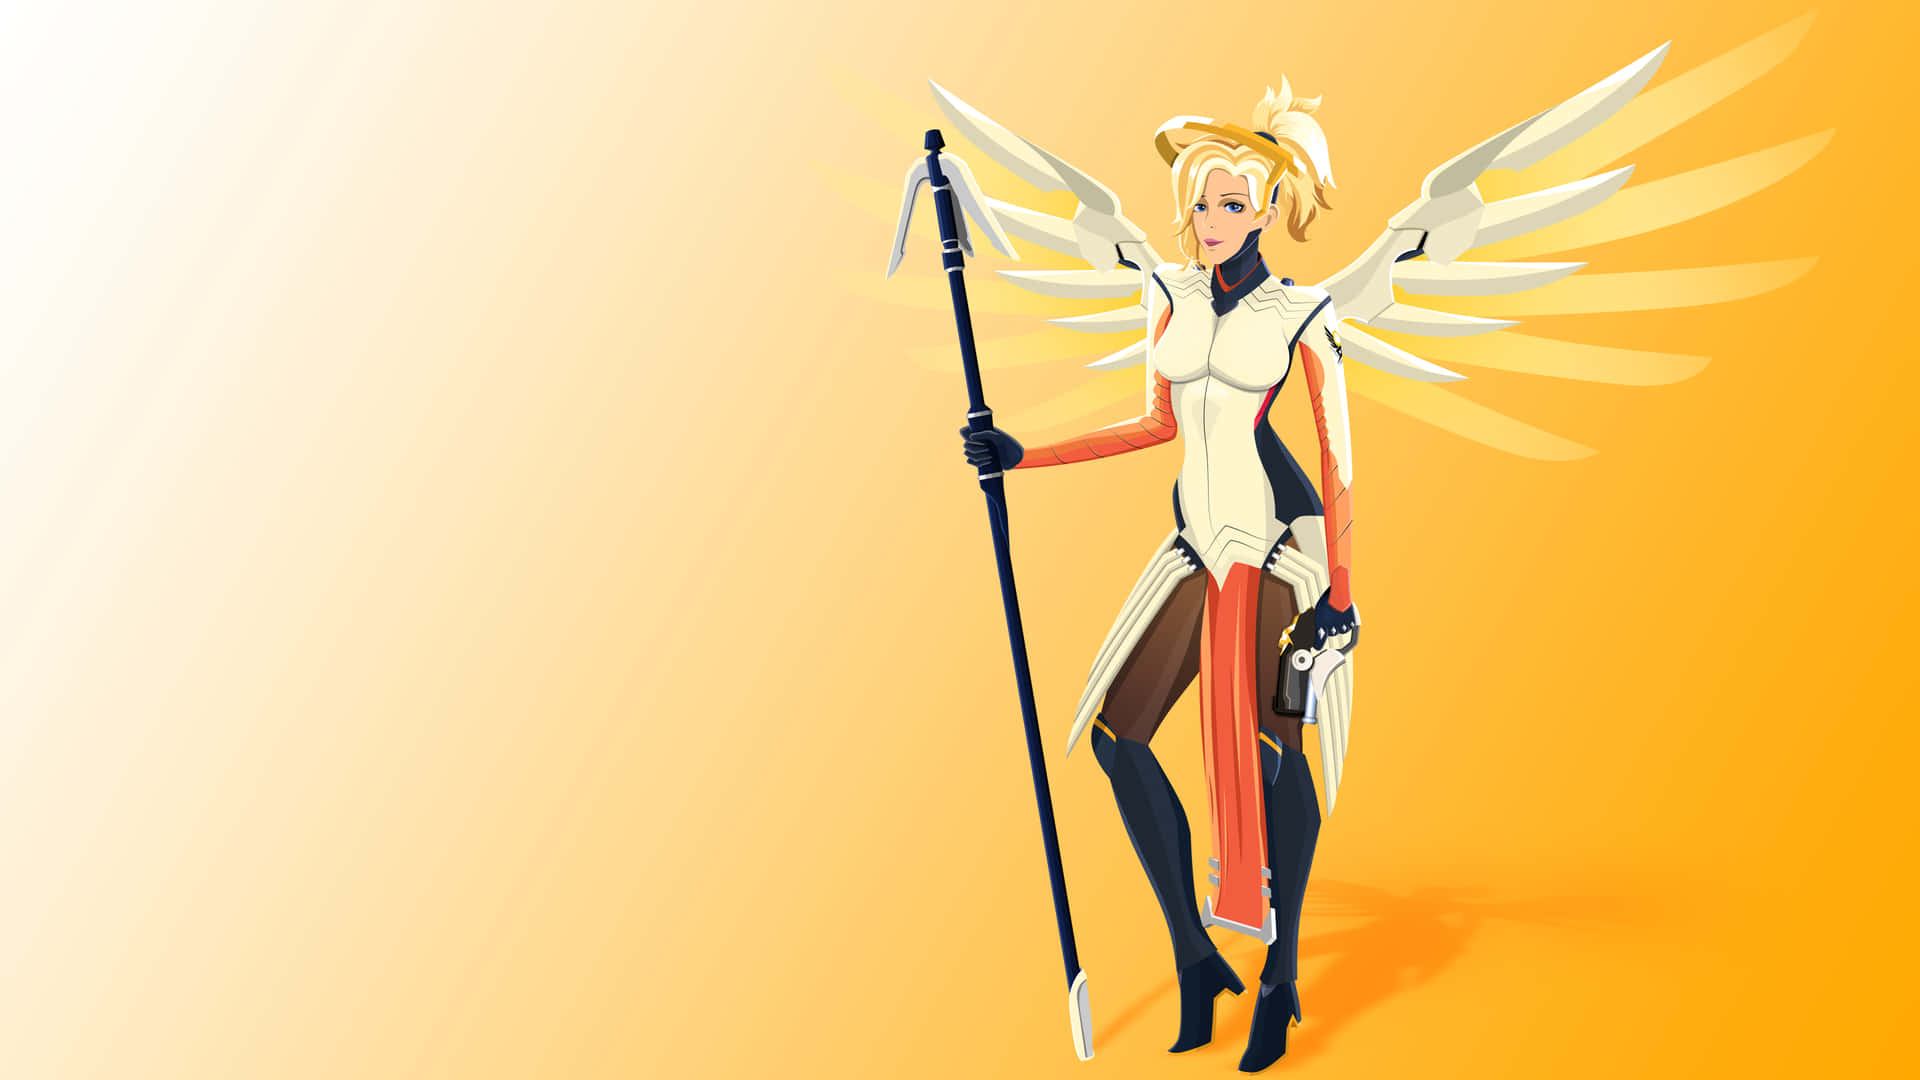 Overwatch Mercy In Action On The Battlefield